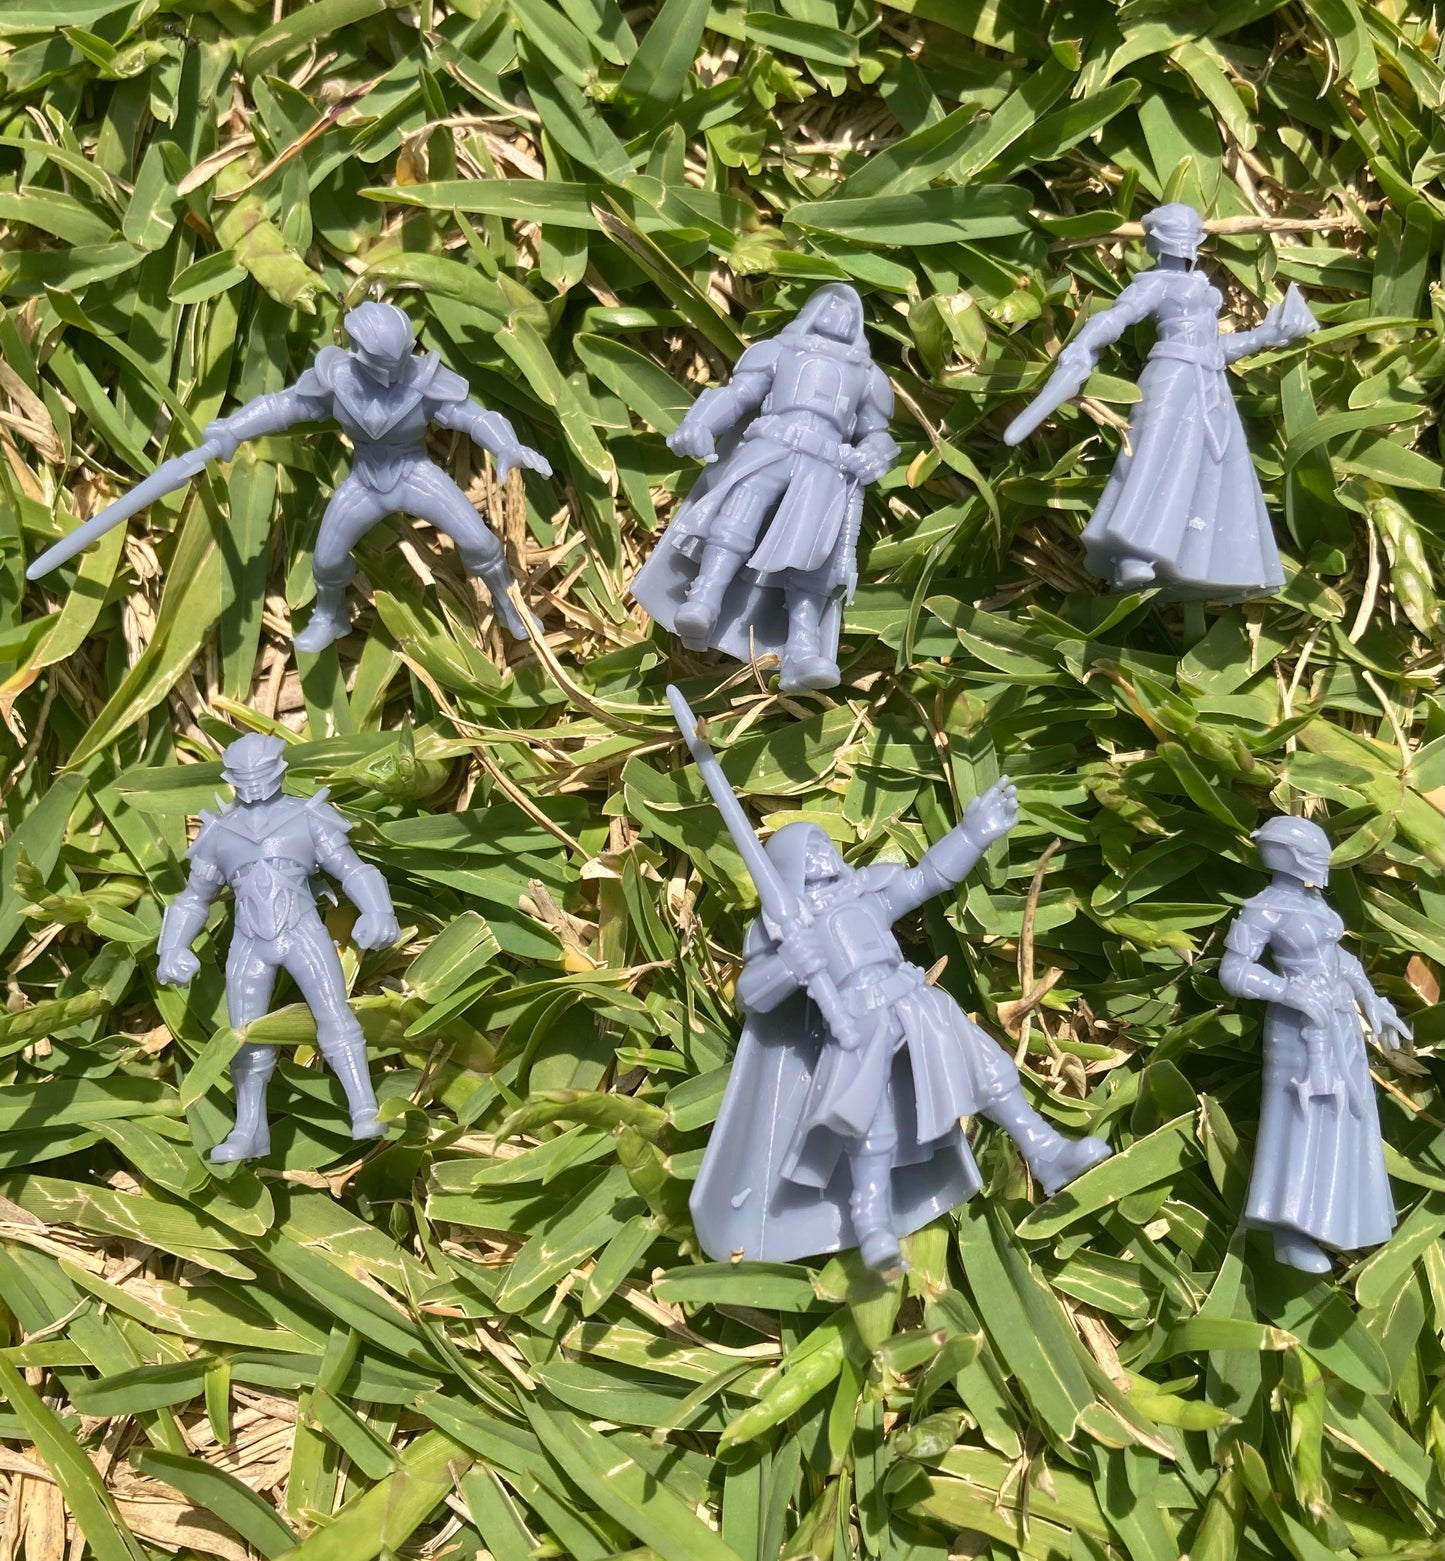 Imperial Inquisitors (6 Variants Available) - Velrock